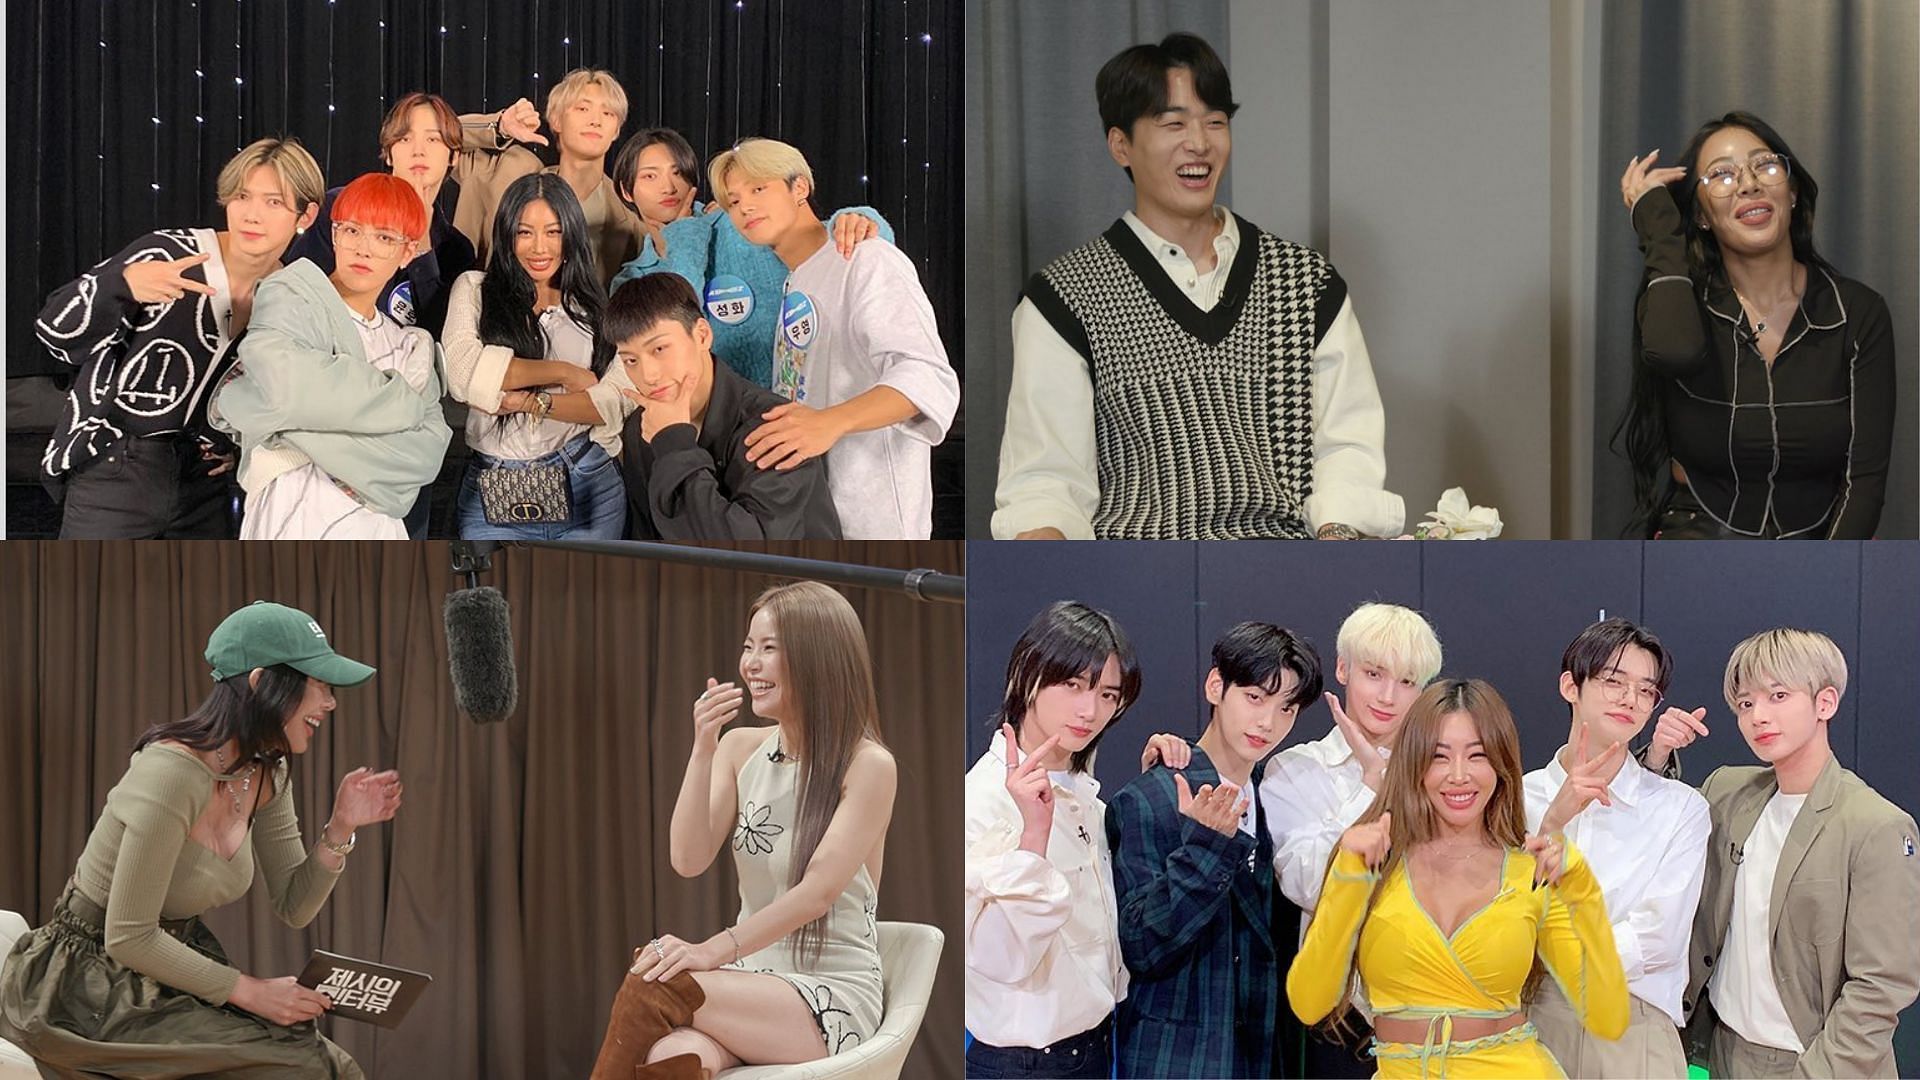 Showterview with Jessi: ATEEZ, TXT, Mamamoo&rsquo;s Solar, and more (Image via jessishow_official/ Instagram)